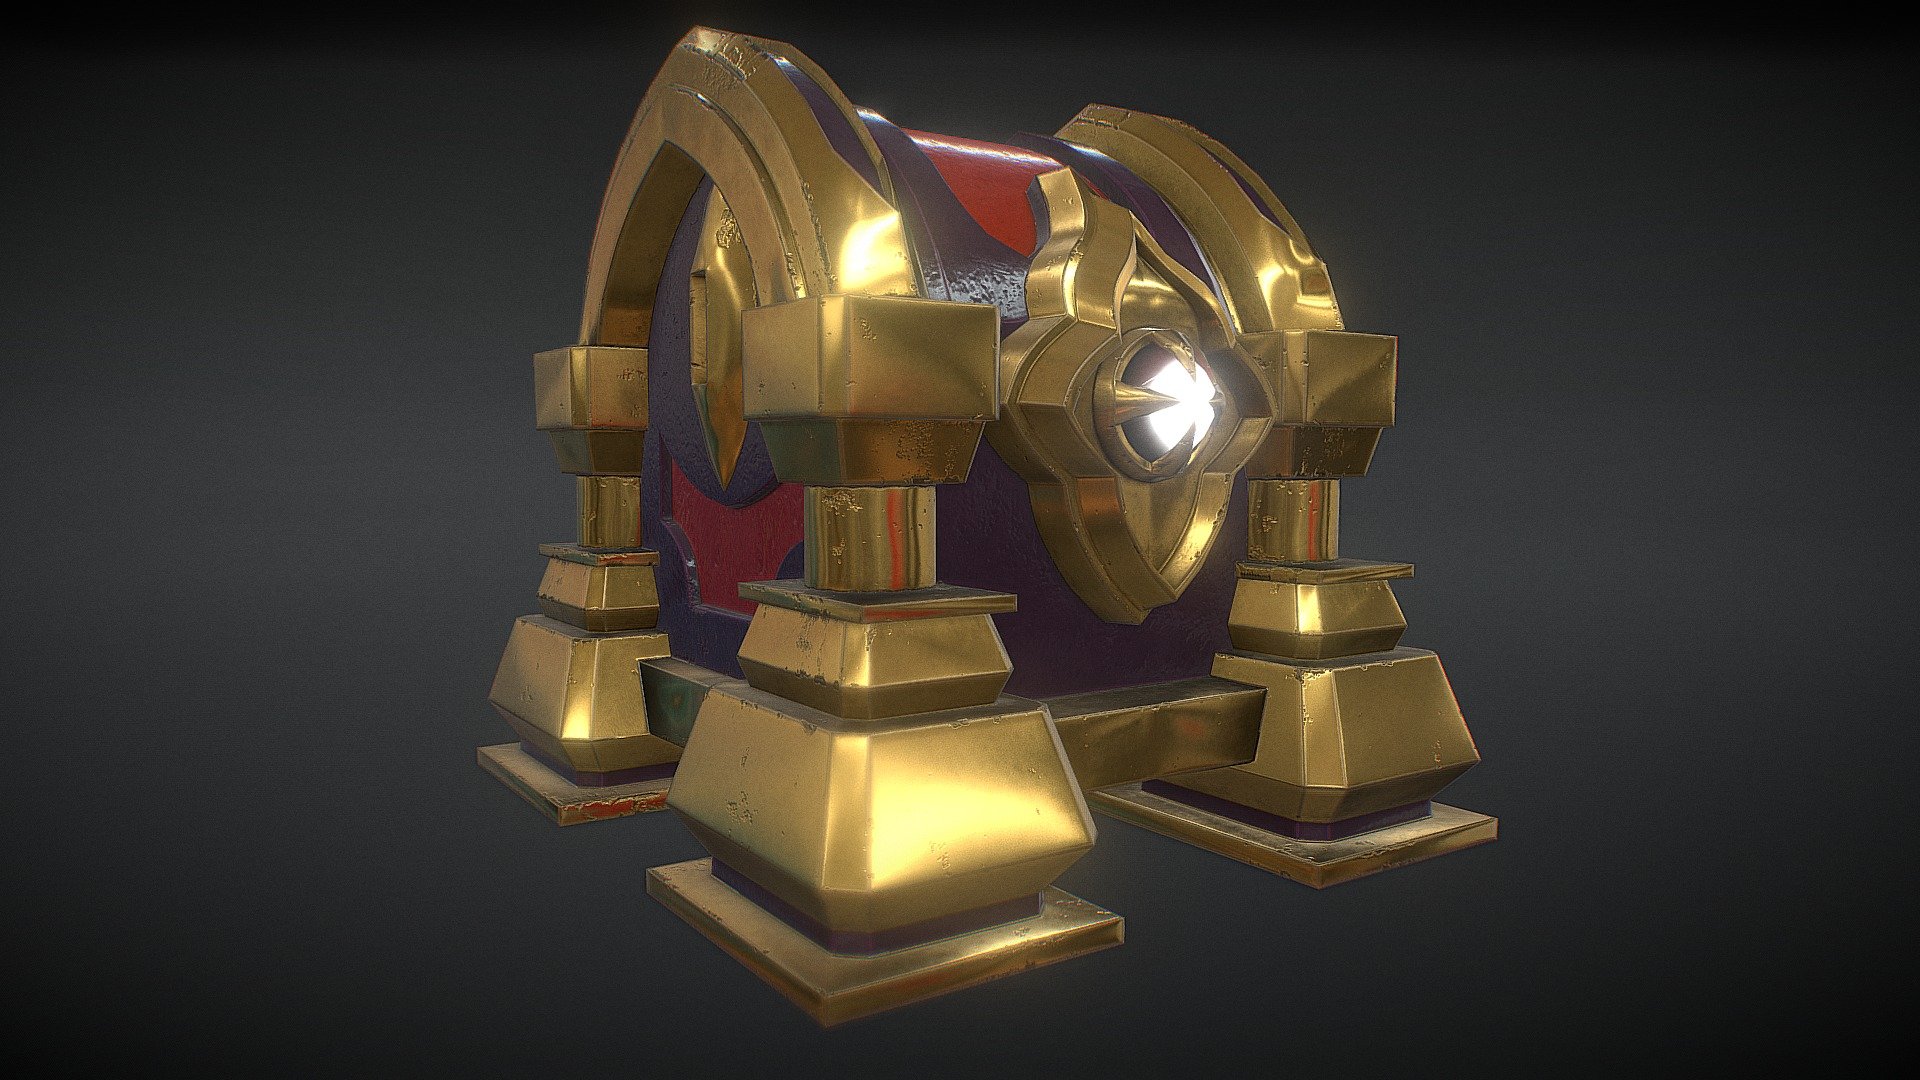 This chest was modeled in Blender and textured in Substance Painter. Of course, the main inspiration was a mix of RPG-like games 3d model